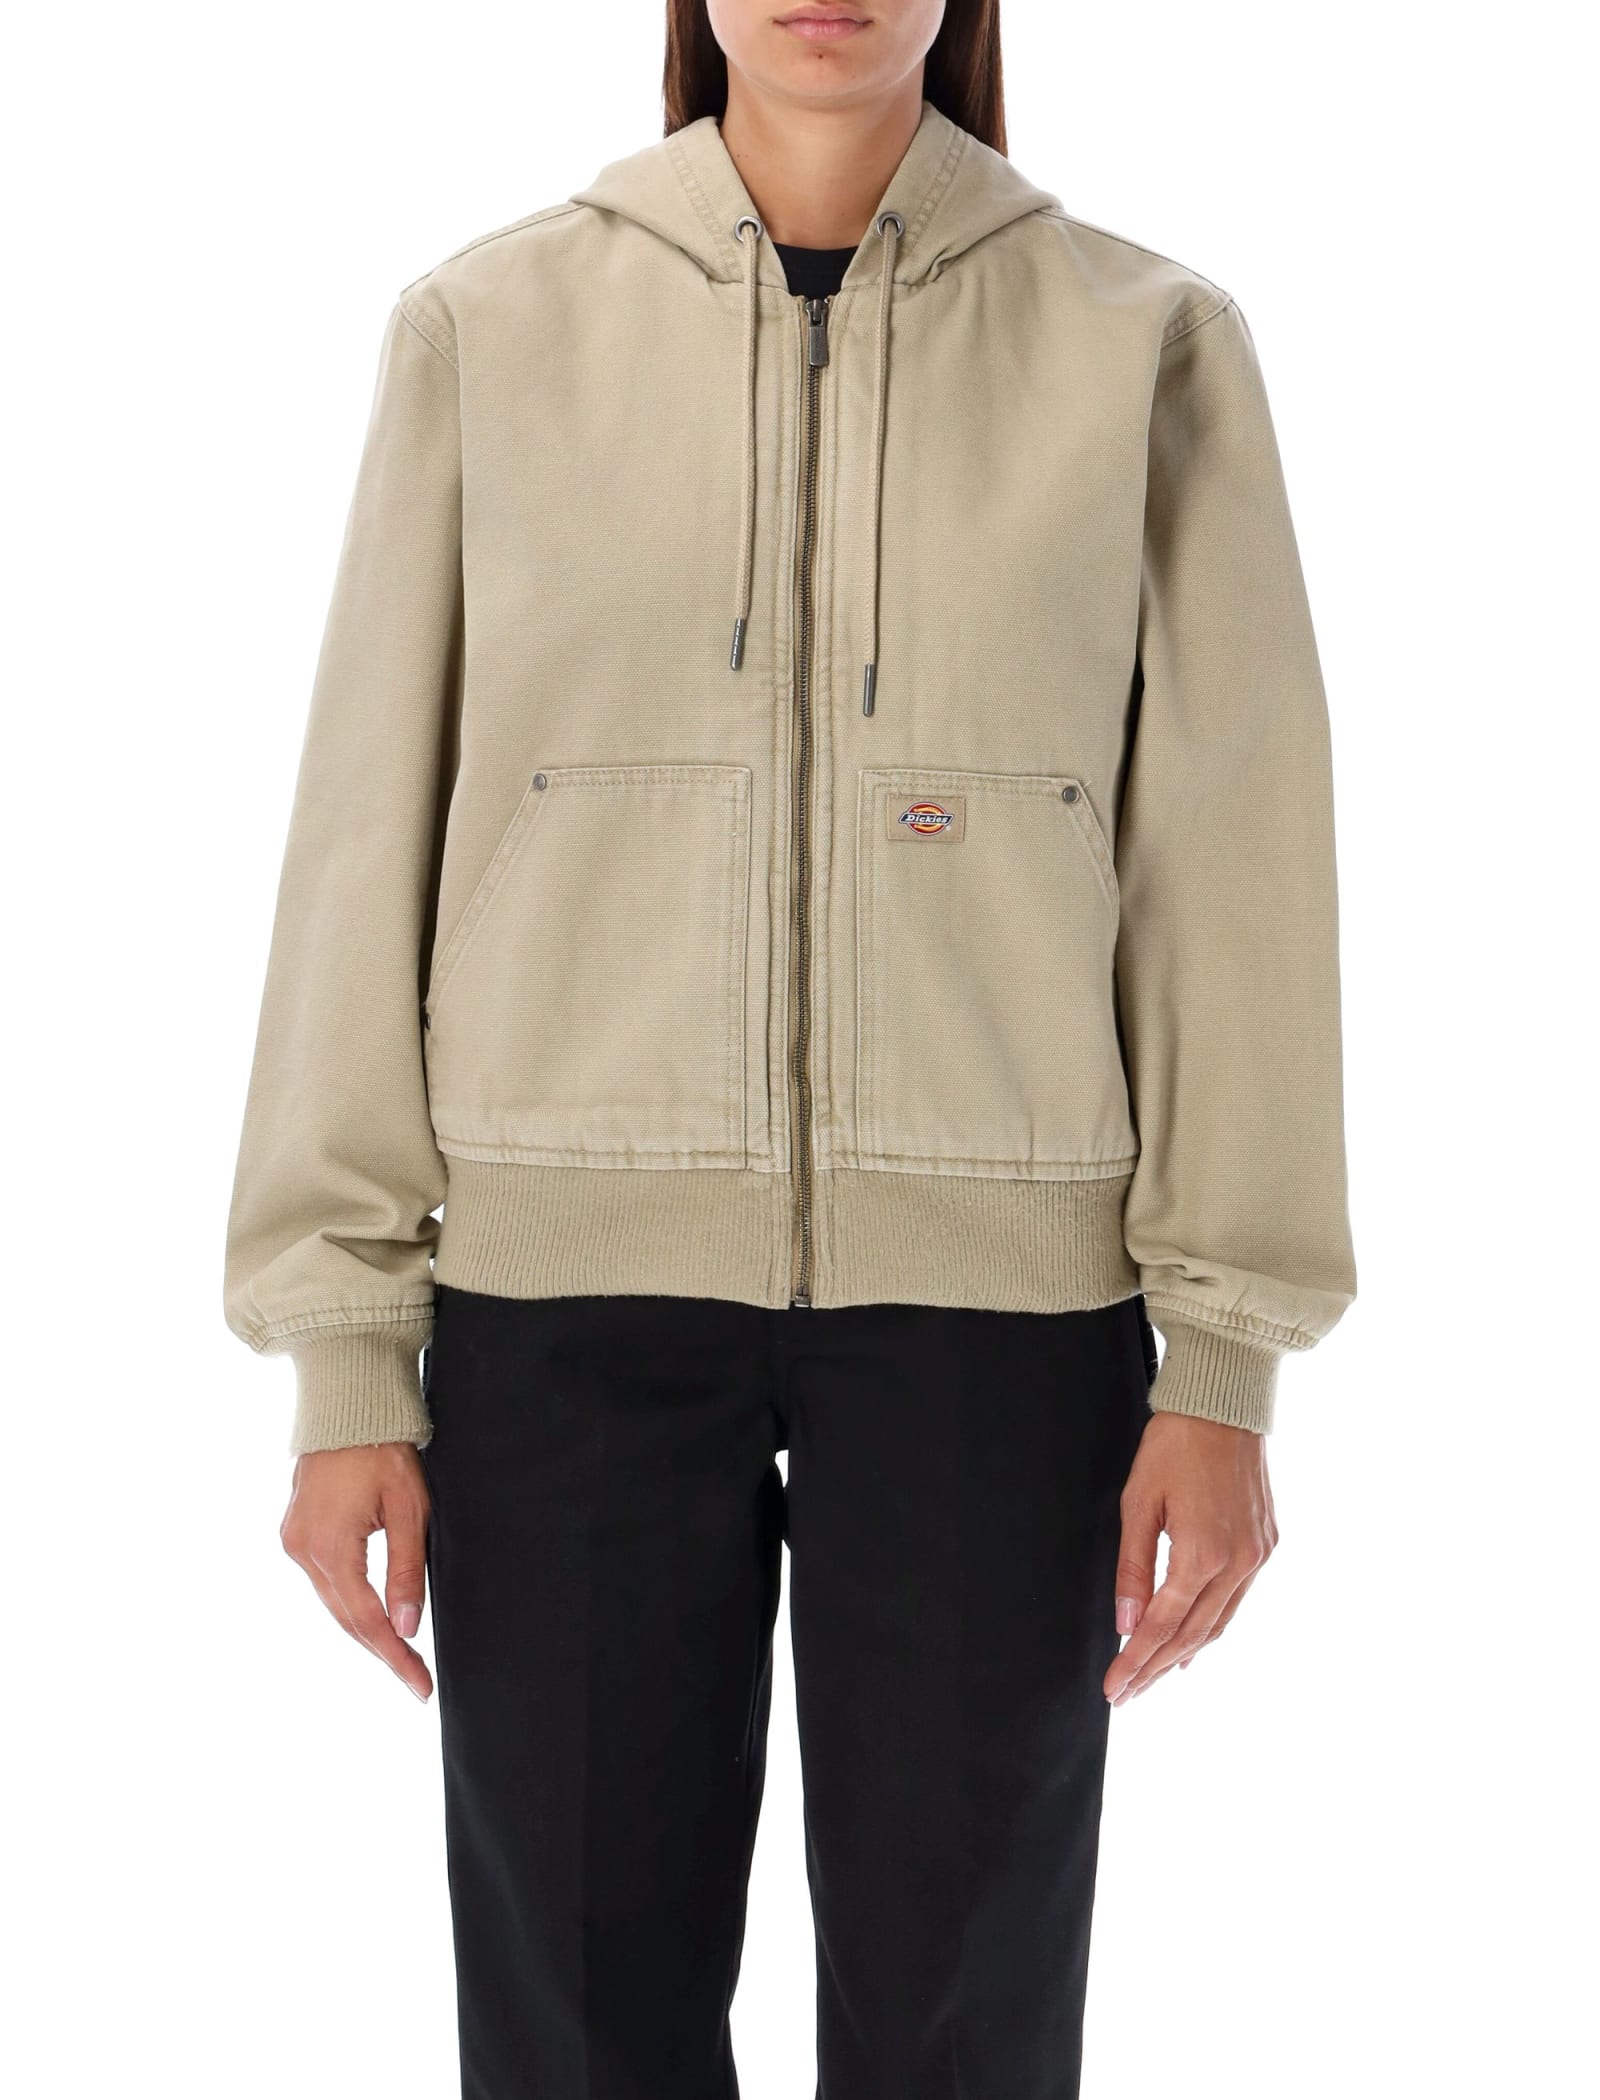 Dickies Sherpa Lined Jacket - 0DESERT SAND - female - Size: Small